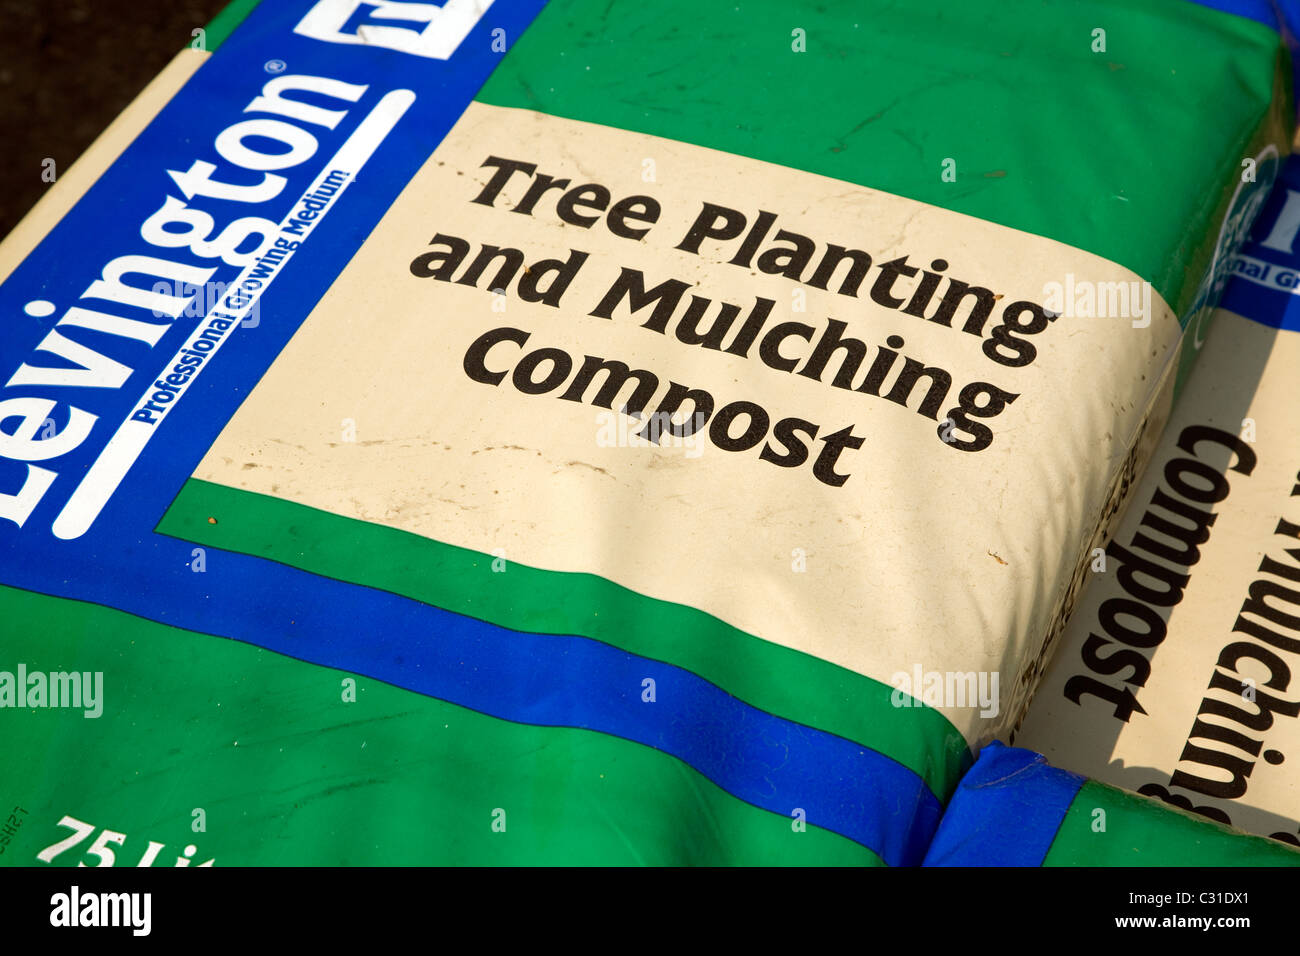 Bags pile tree planting mulching compost Stock Photo